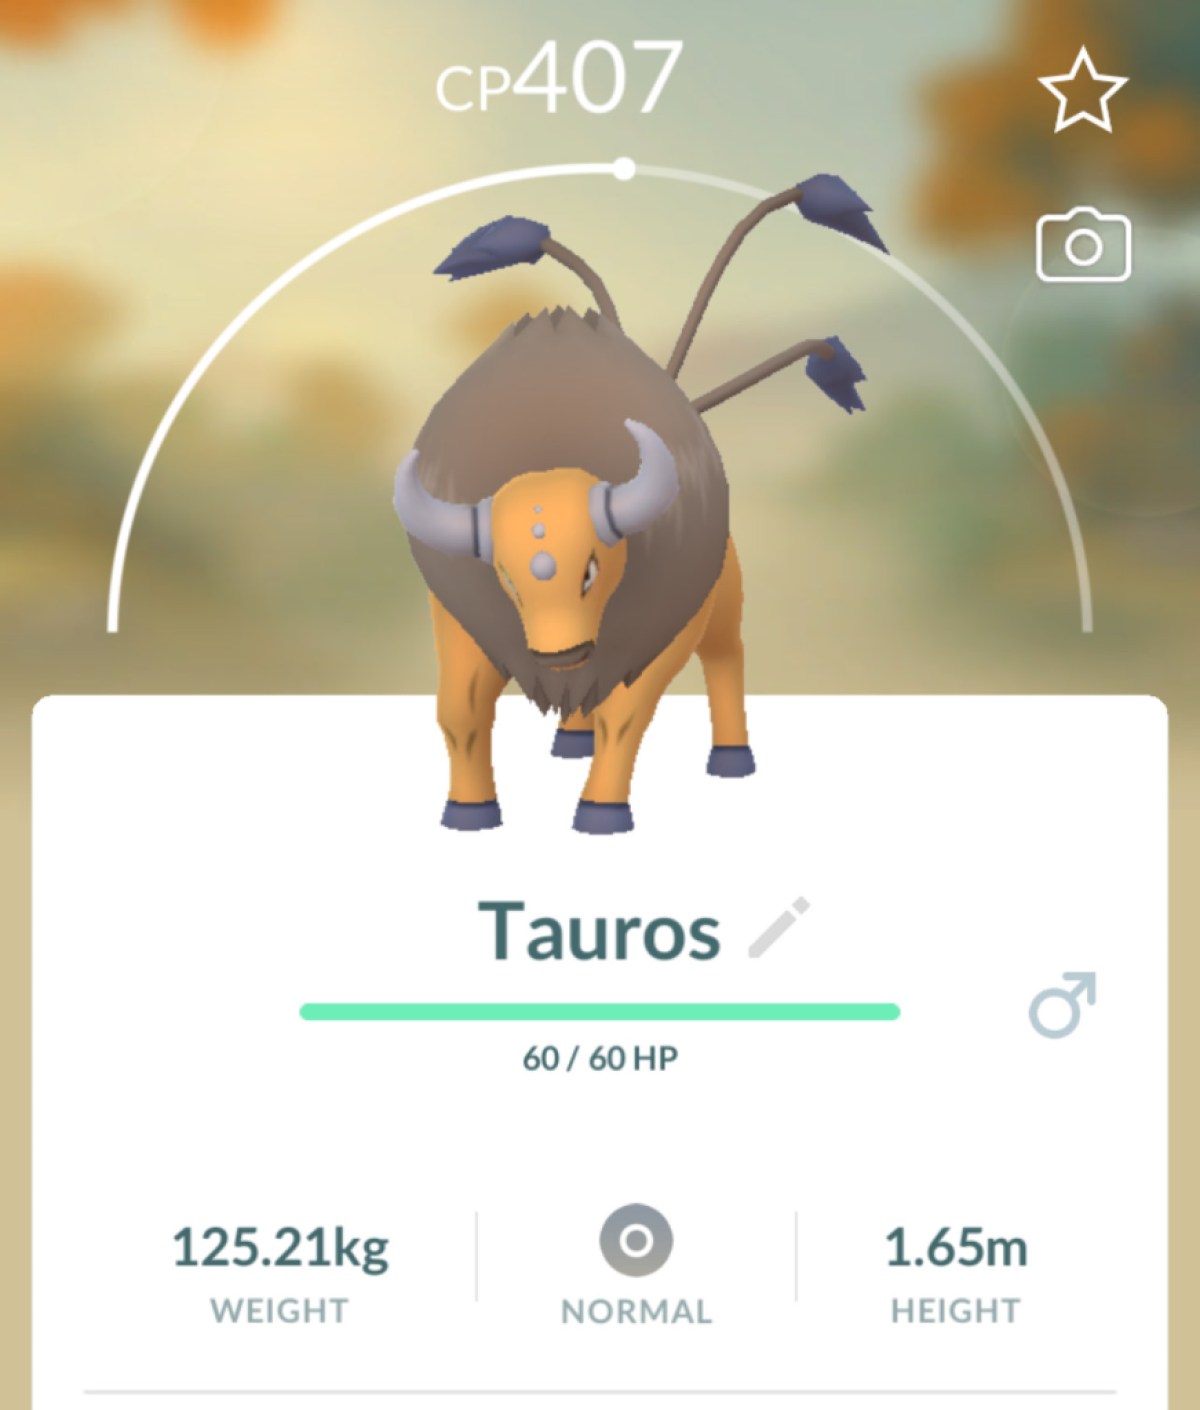 Tauros in Pokemon GO. This image is part of an article about how to get and use XL Candy in Pokemon GO.